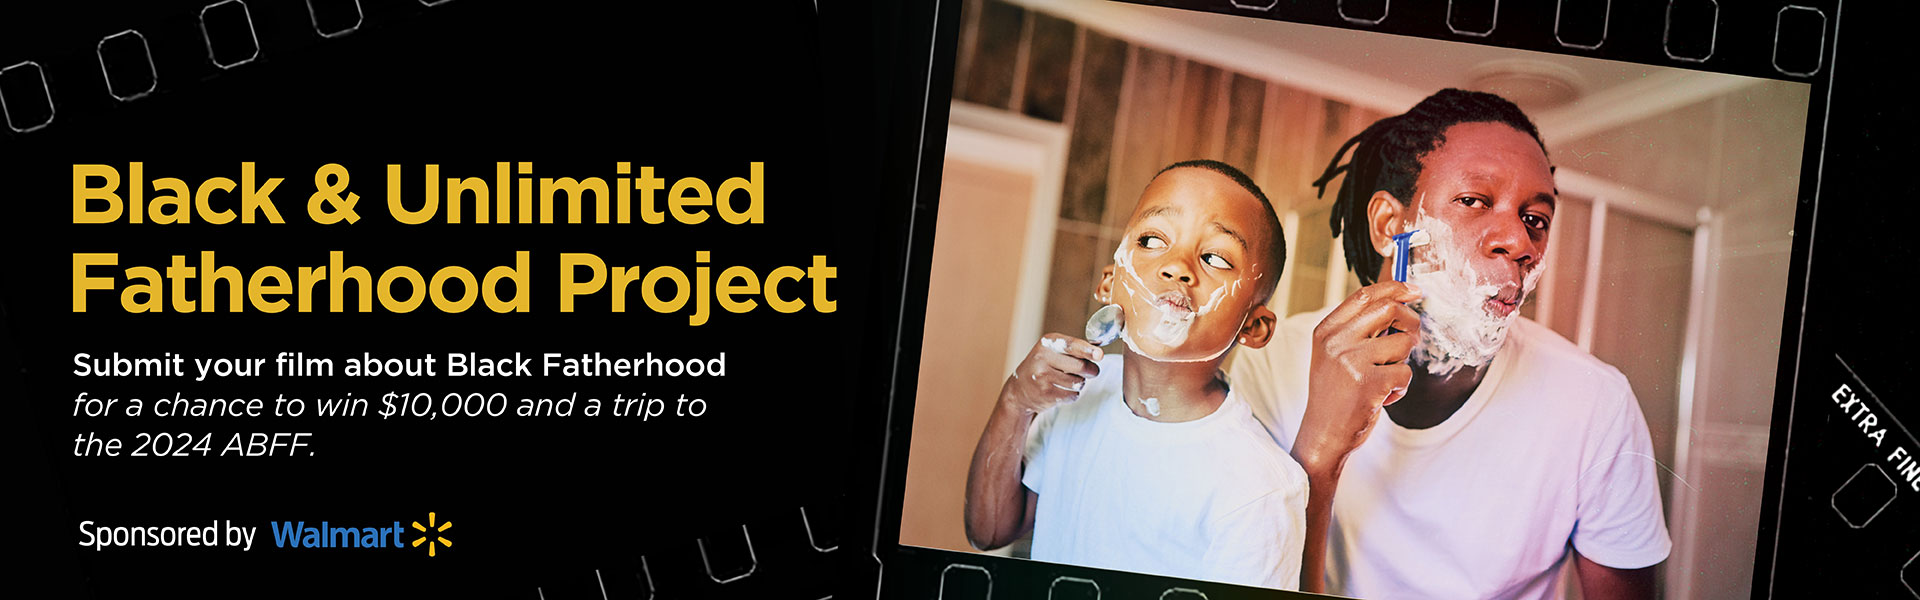 Black & Unlimited Fatherhood Project - Submit your film about Black Fatherhood for a chance to win $10,000 and a trip to the 2024 ABFF. Sponsored by Walmart